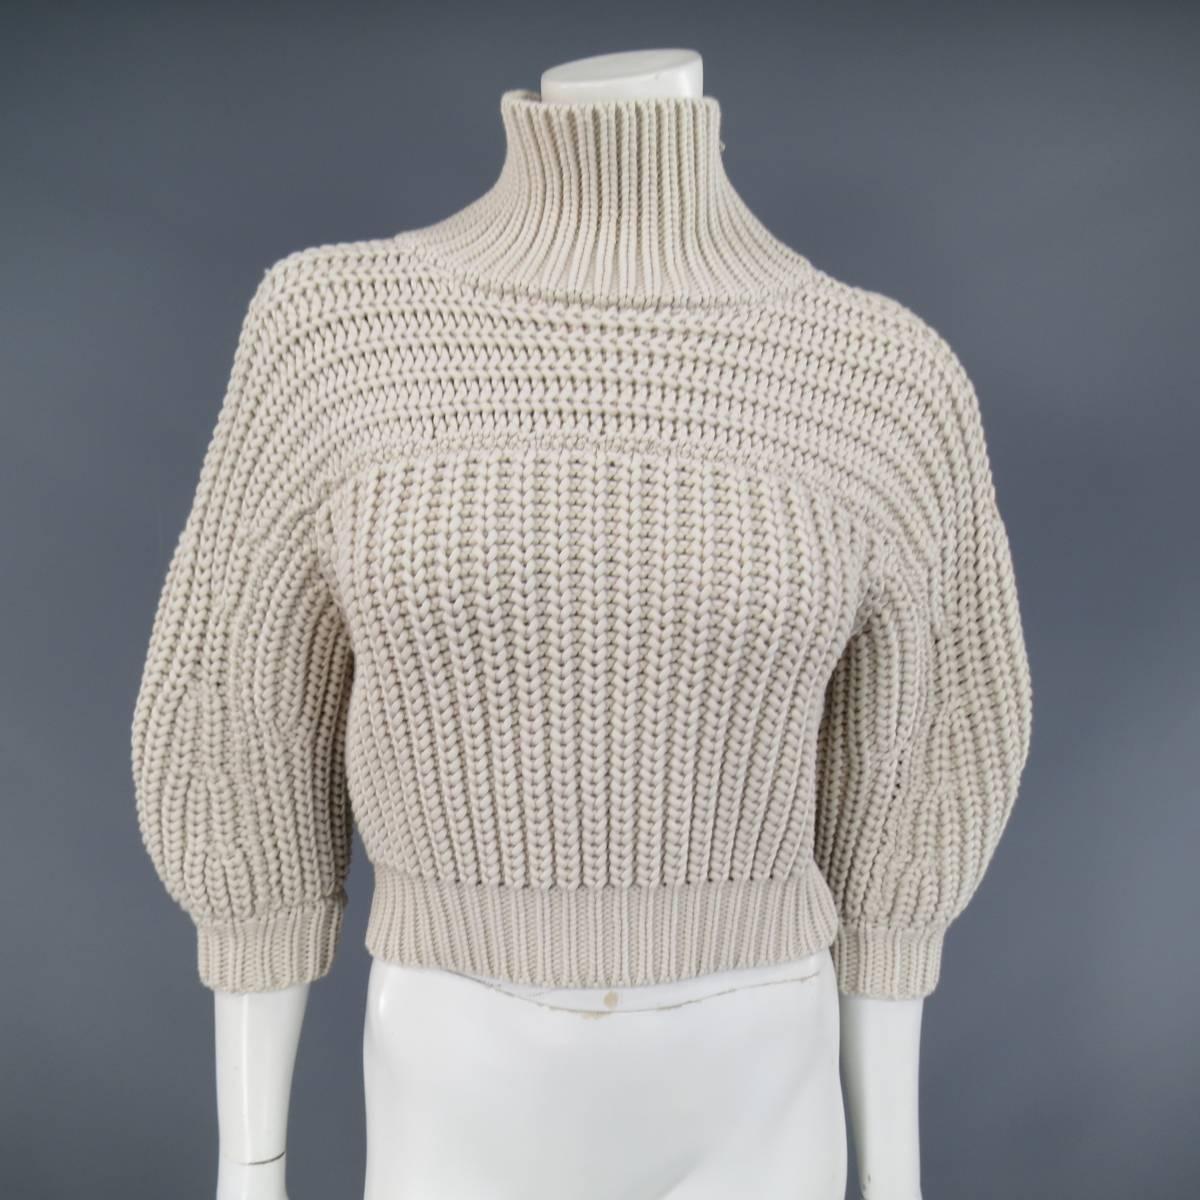 This lovely BURNELLO CUCINELLI sweater comes in a a khaki beige cotton blend chunky interlock knit and features 3/4 puff sleeves, and a zip shoulder mock neck with silver tone sparkle chain detail. Made in Italy.
 
Excellent Pre-Owned